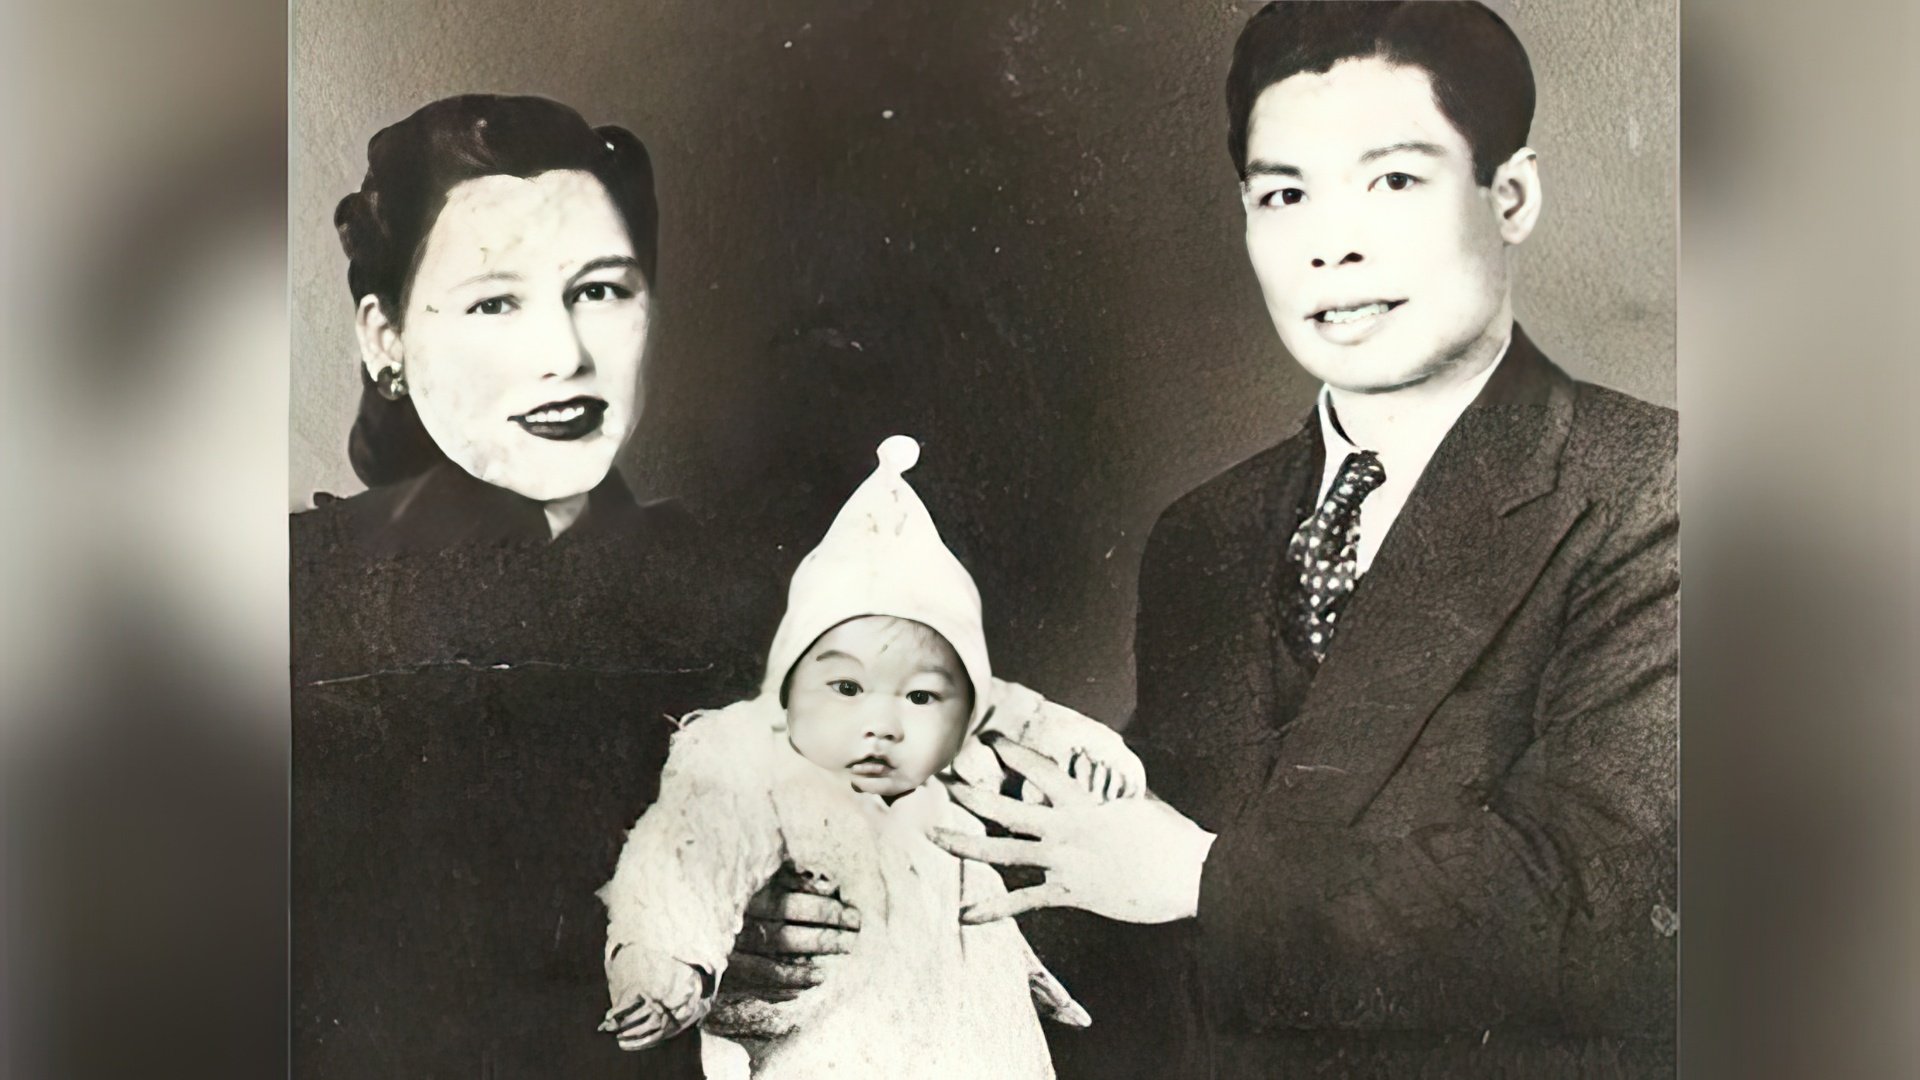 Bruce Lee with his parents in his childhood